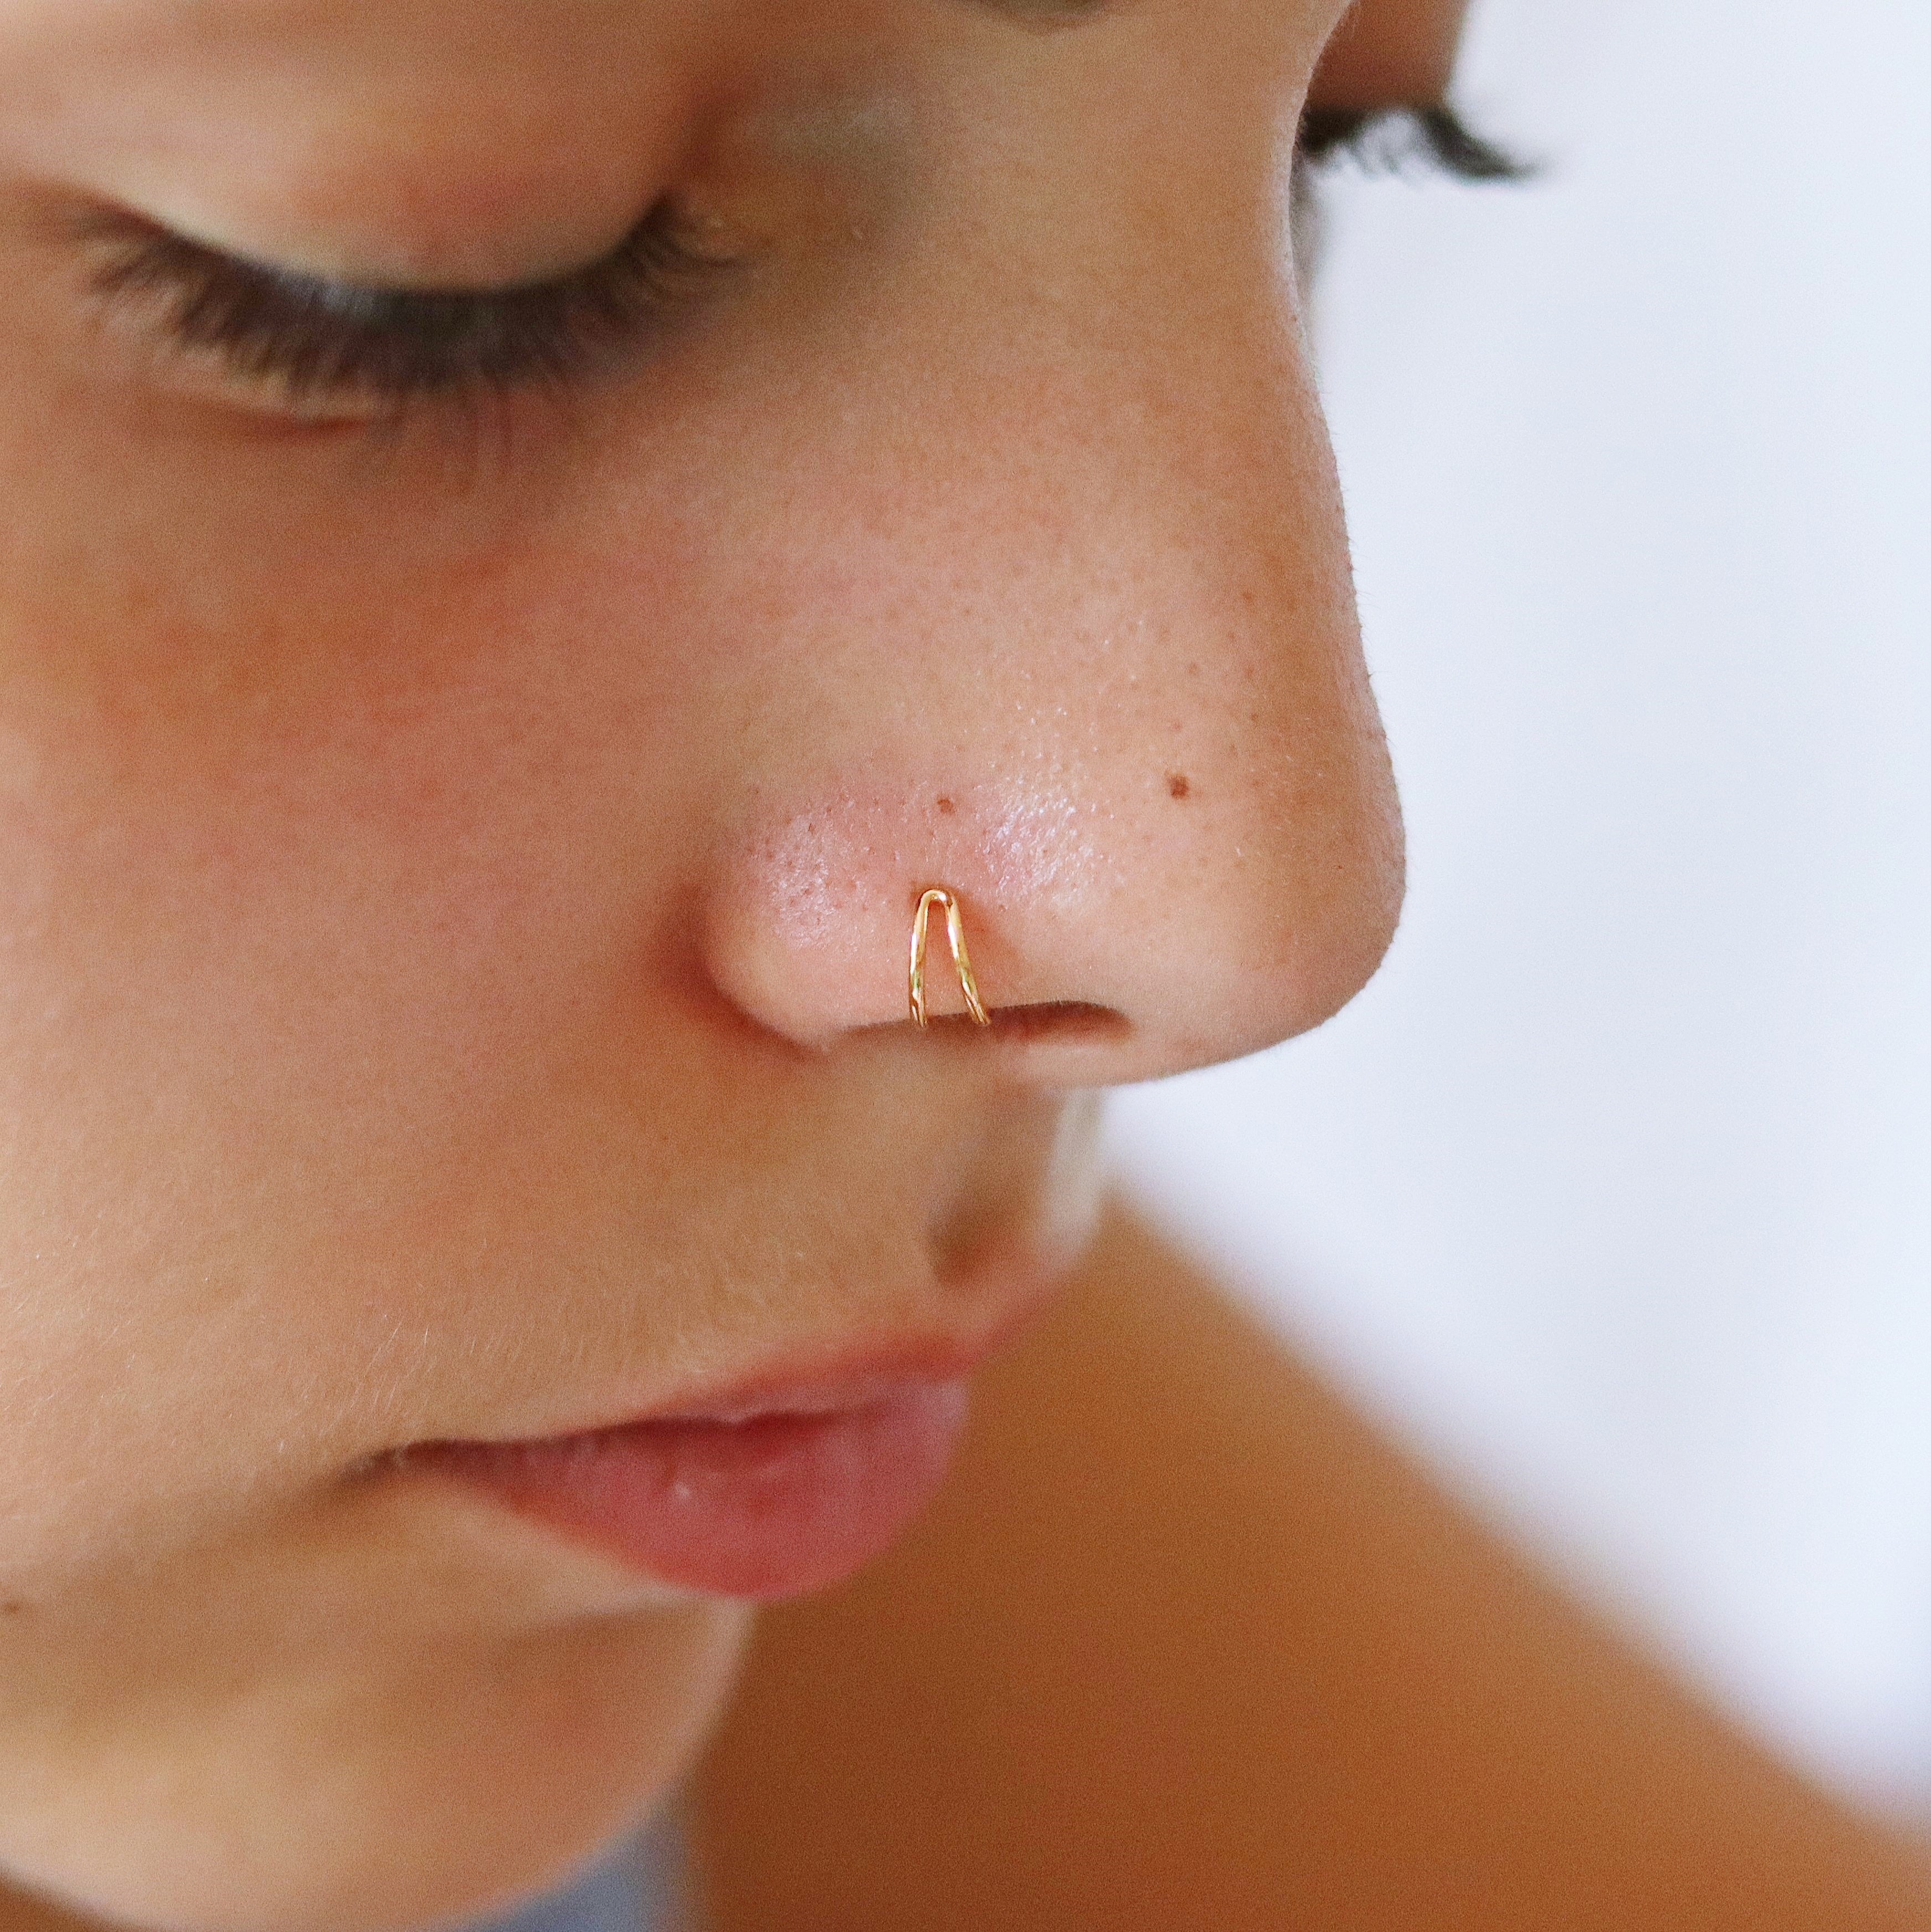 Nose Ring Sizing: Getting the Perfect Fit| UrbanBodyJewelry.com |  UrbanBodyJewelry.com